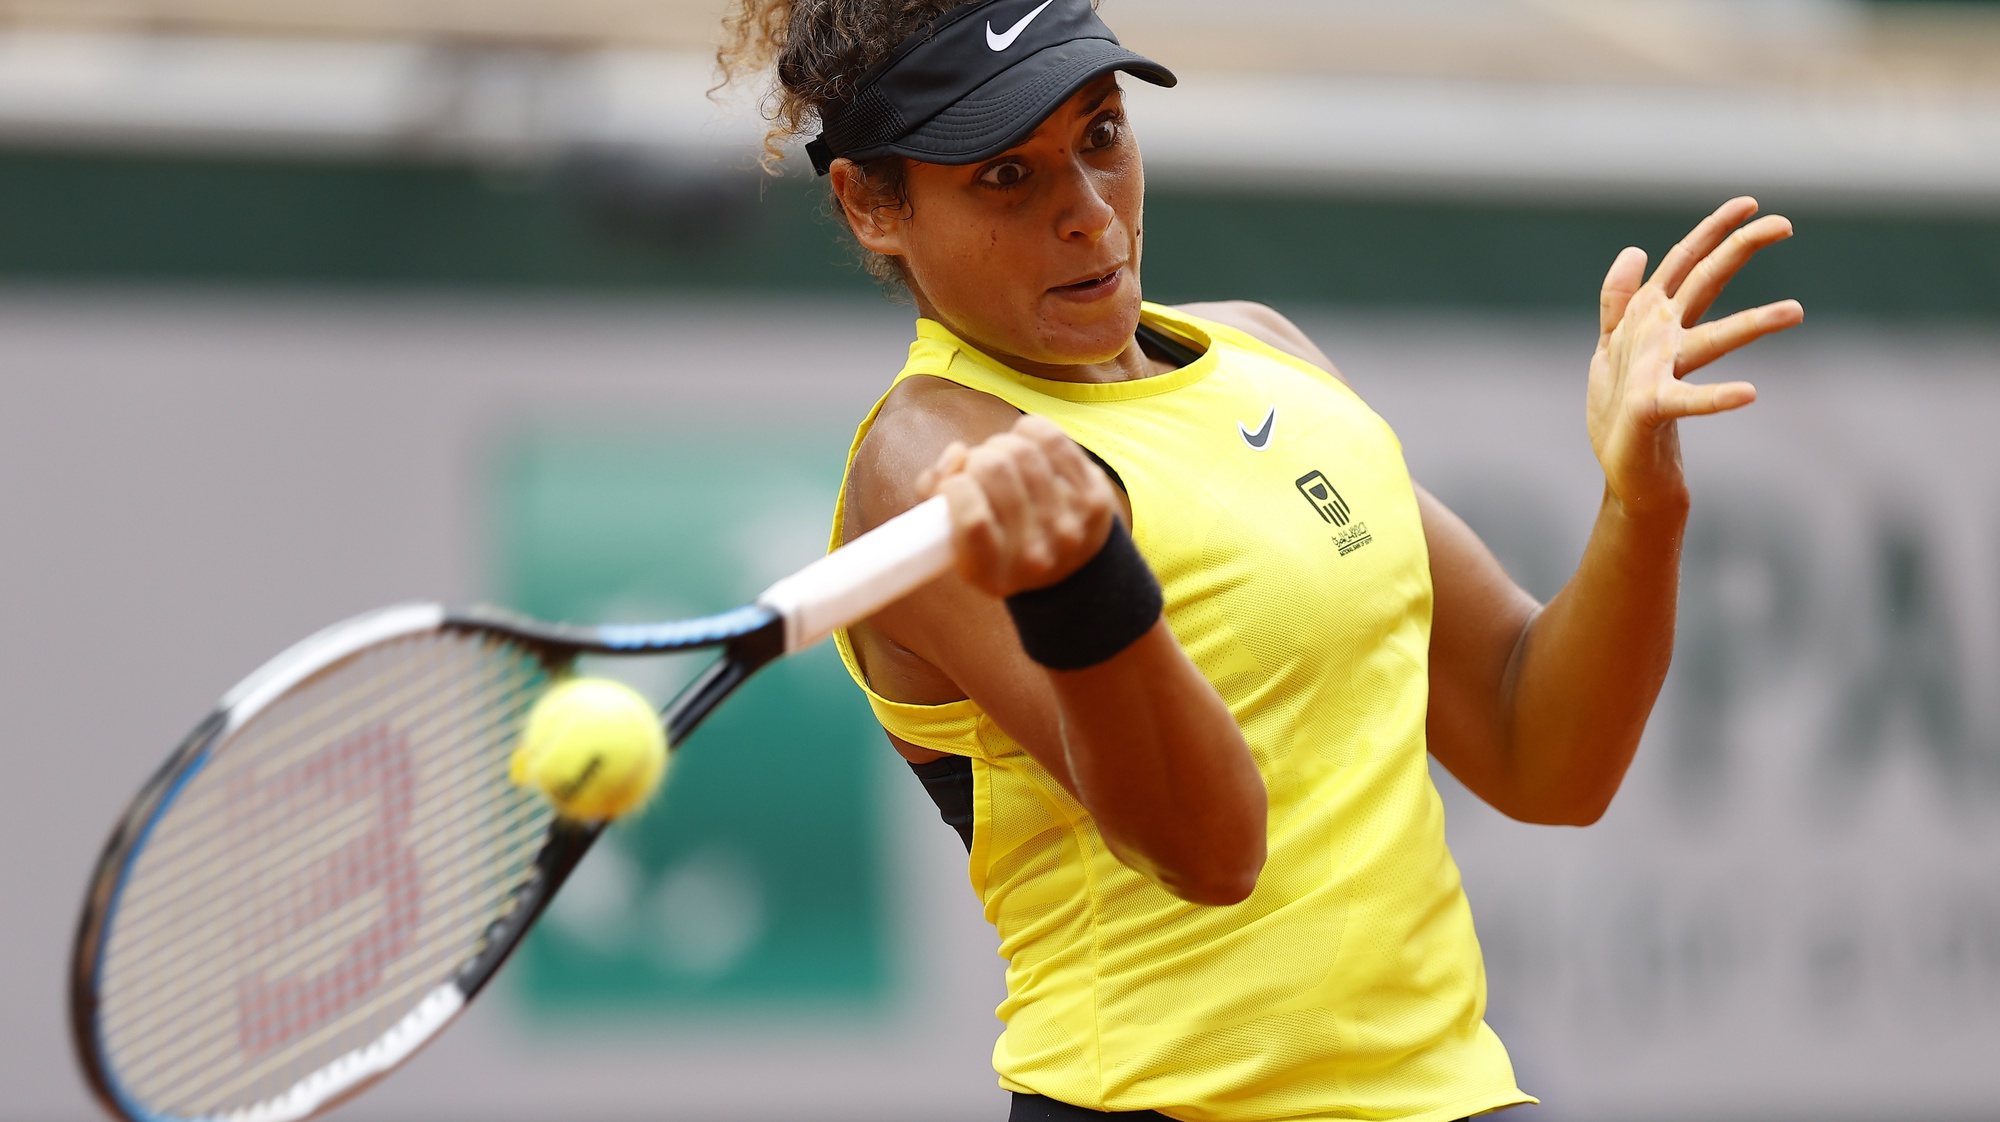 epa08705377 Mayar Sherif of Egypt hits a forehand during her first round match against Karolina Pliskova at the French Open tennis tournament at Roland Garros in Paris, France, 29 September 2020.  EPA/IAN LANGSDON